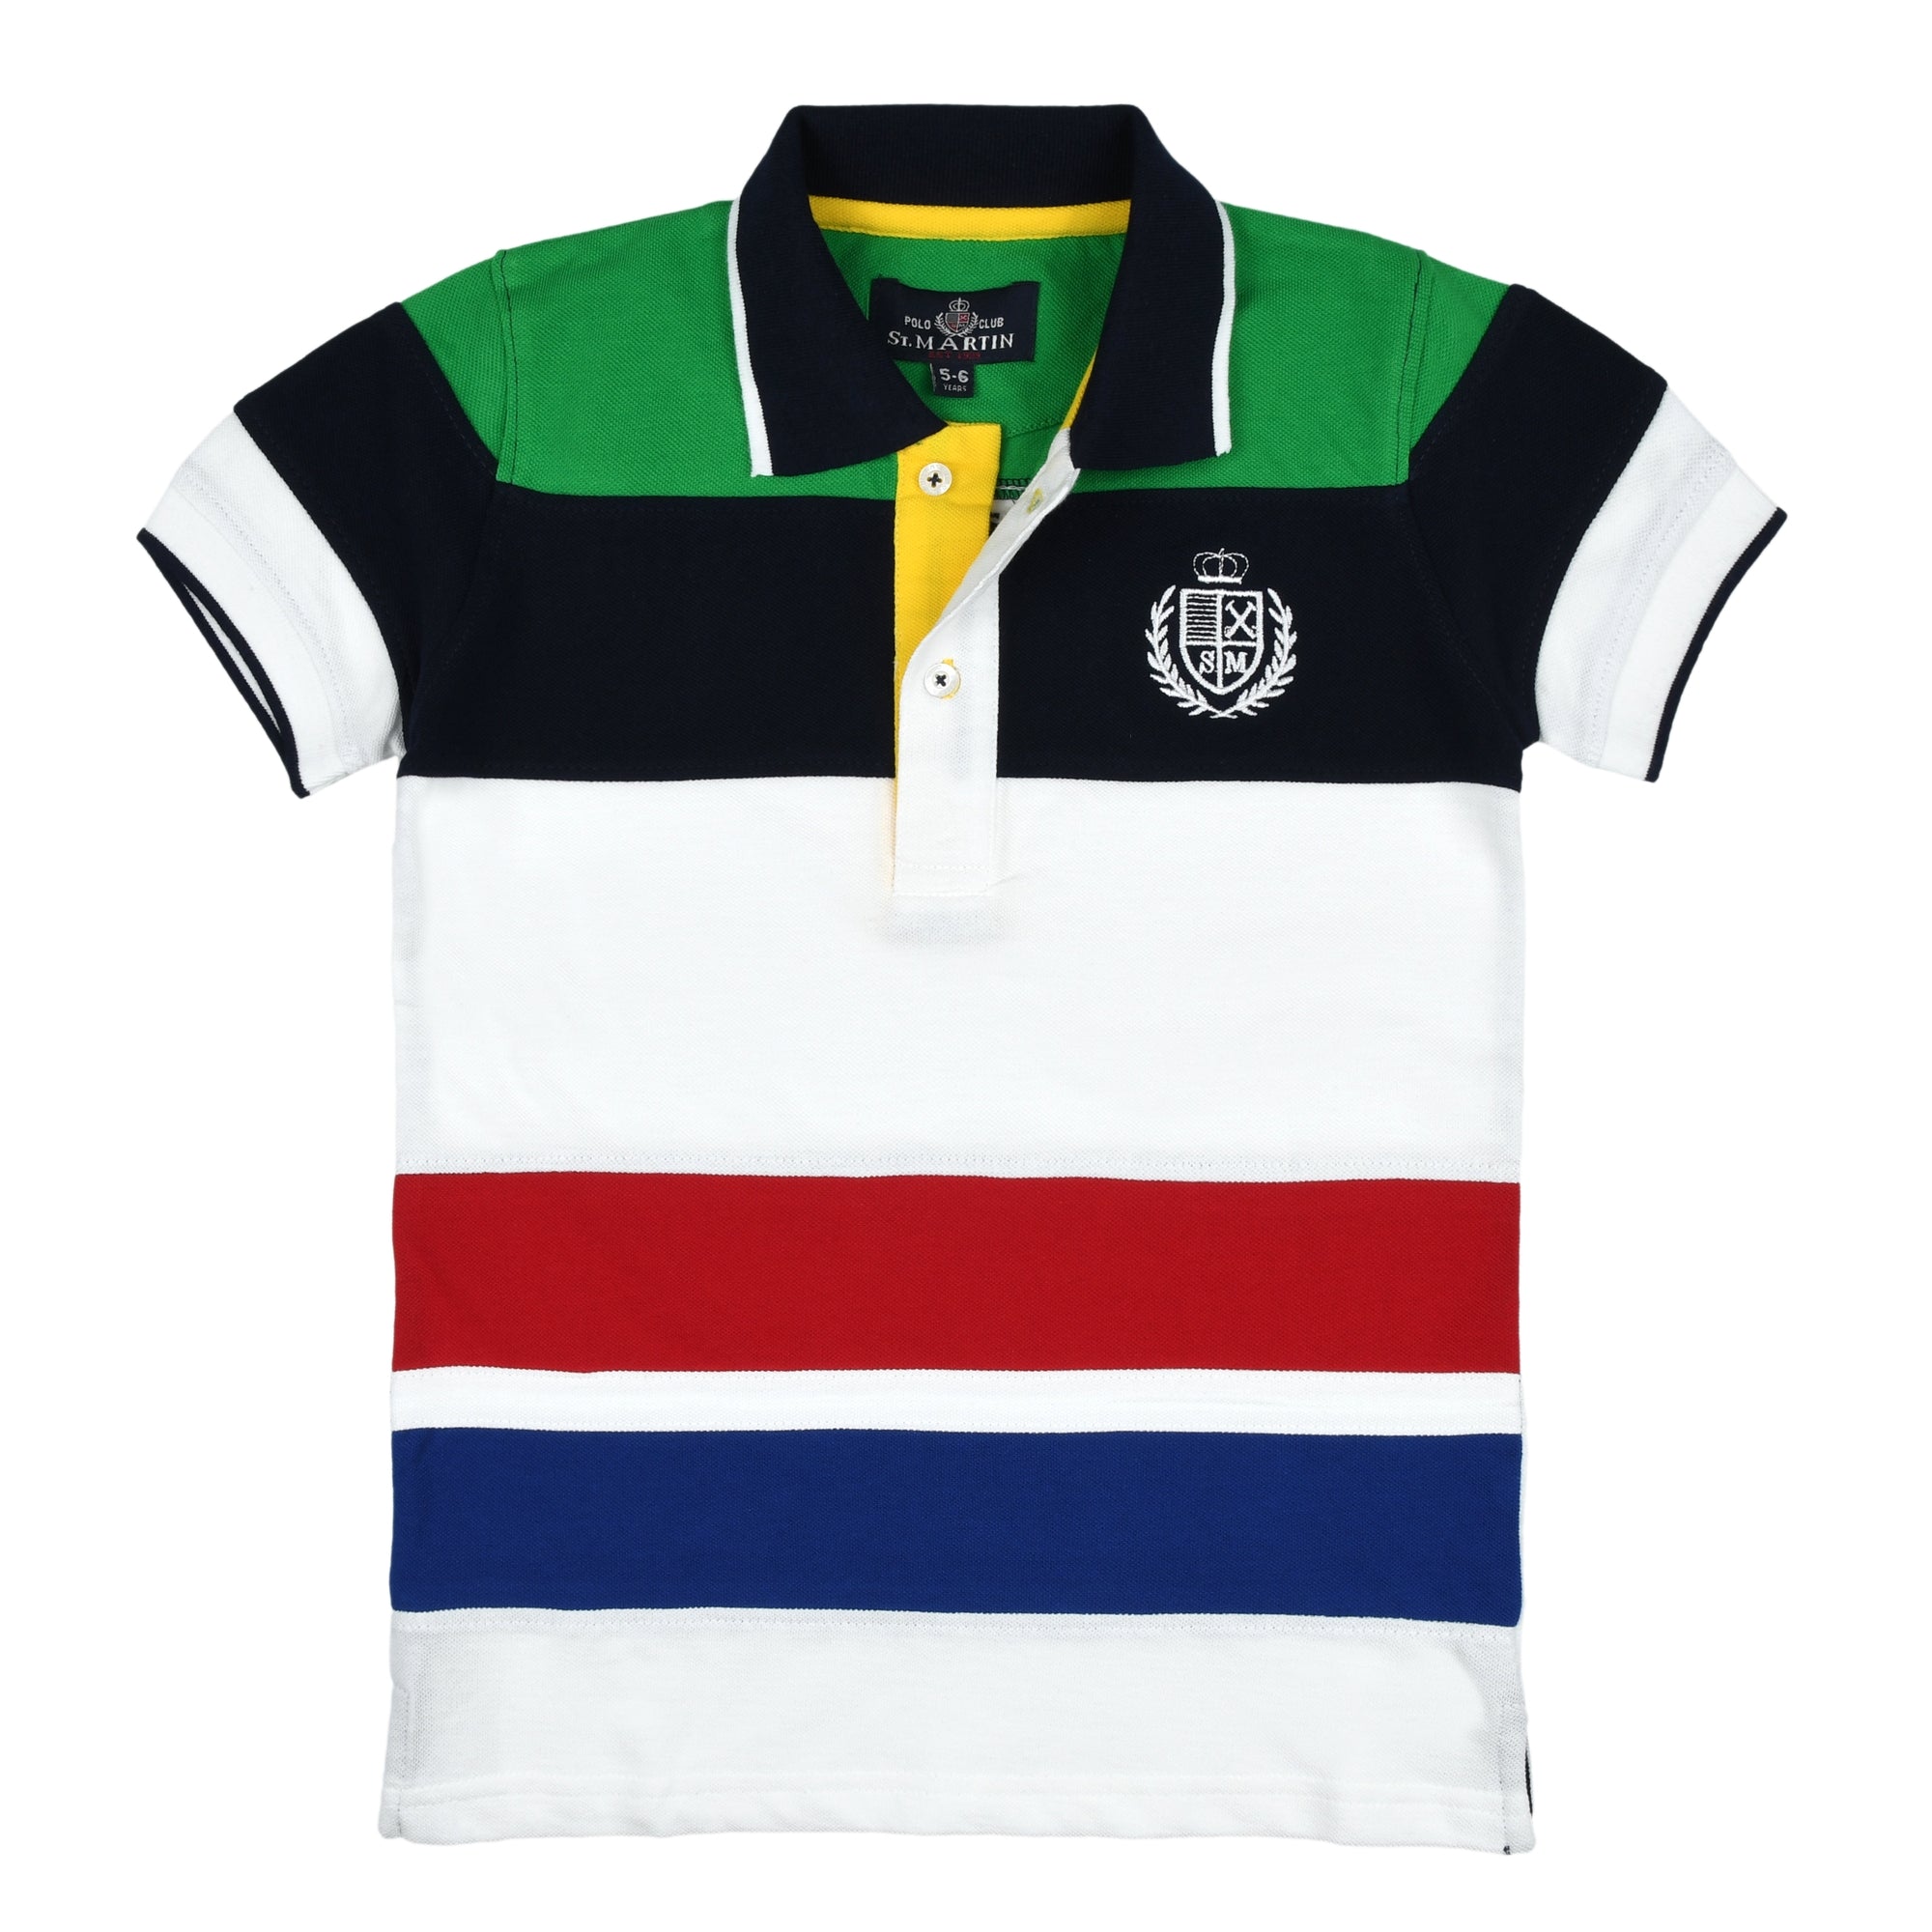 Piqué polo shirt with bands and logo embroidery